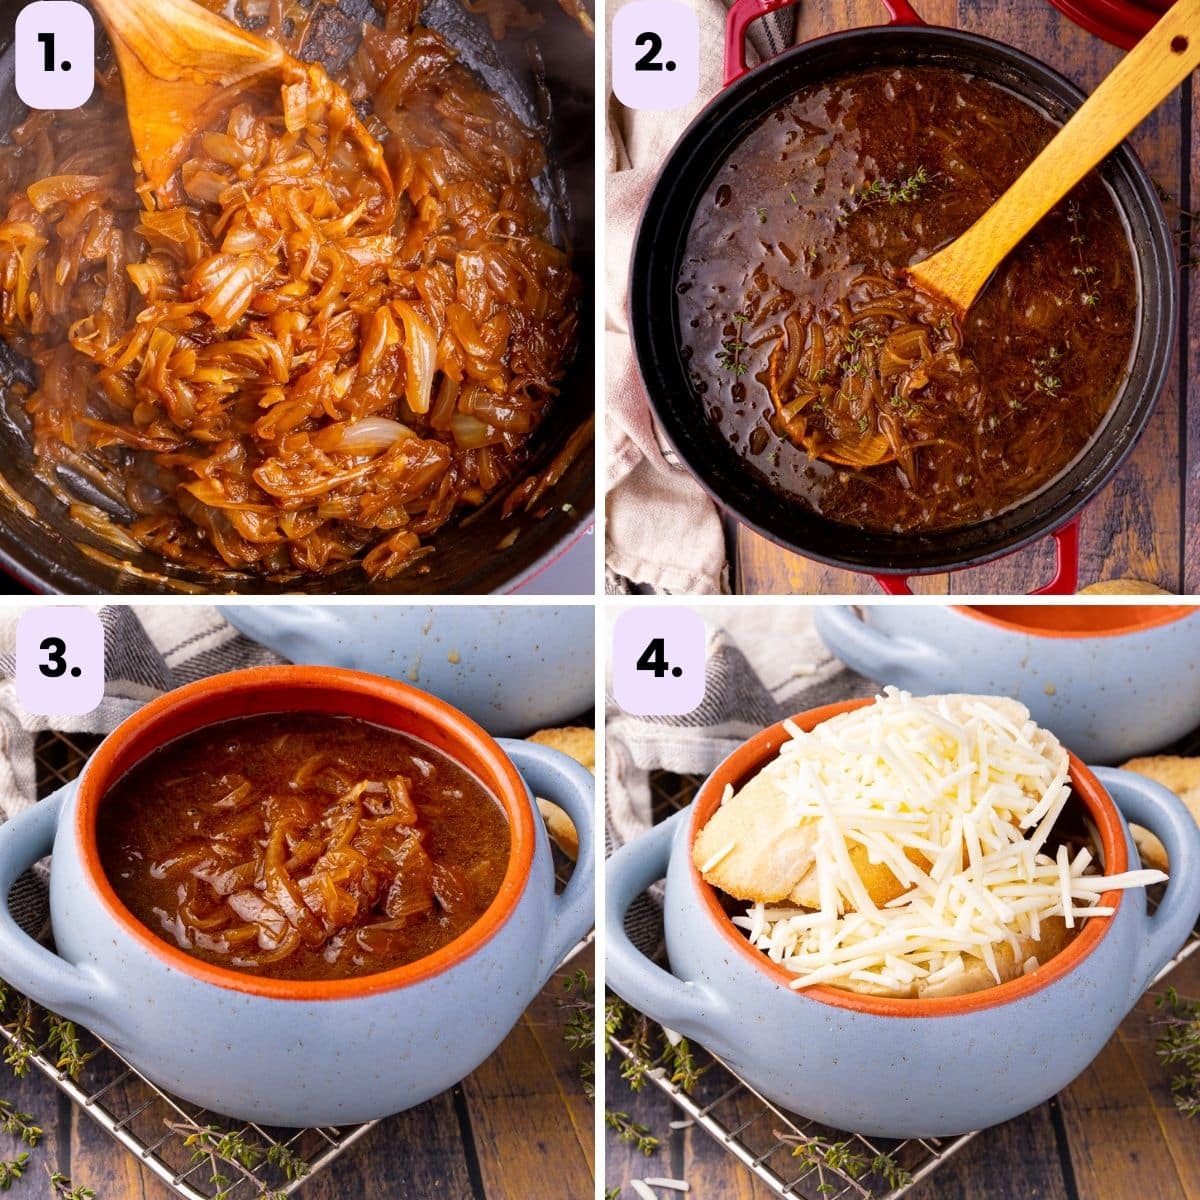 a collage: picture 1 shows caramelized onions in a pan, picture 2 shows a pan of cooked French onion soup, picture 3 shows some soup in a small blue soup bowl, and picture 4 shows the same soup bowl but with bagueete and cheese shreds on top 